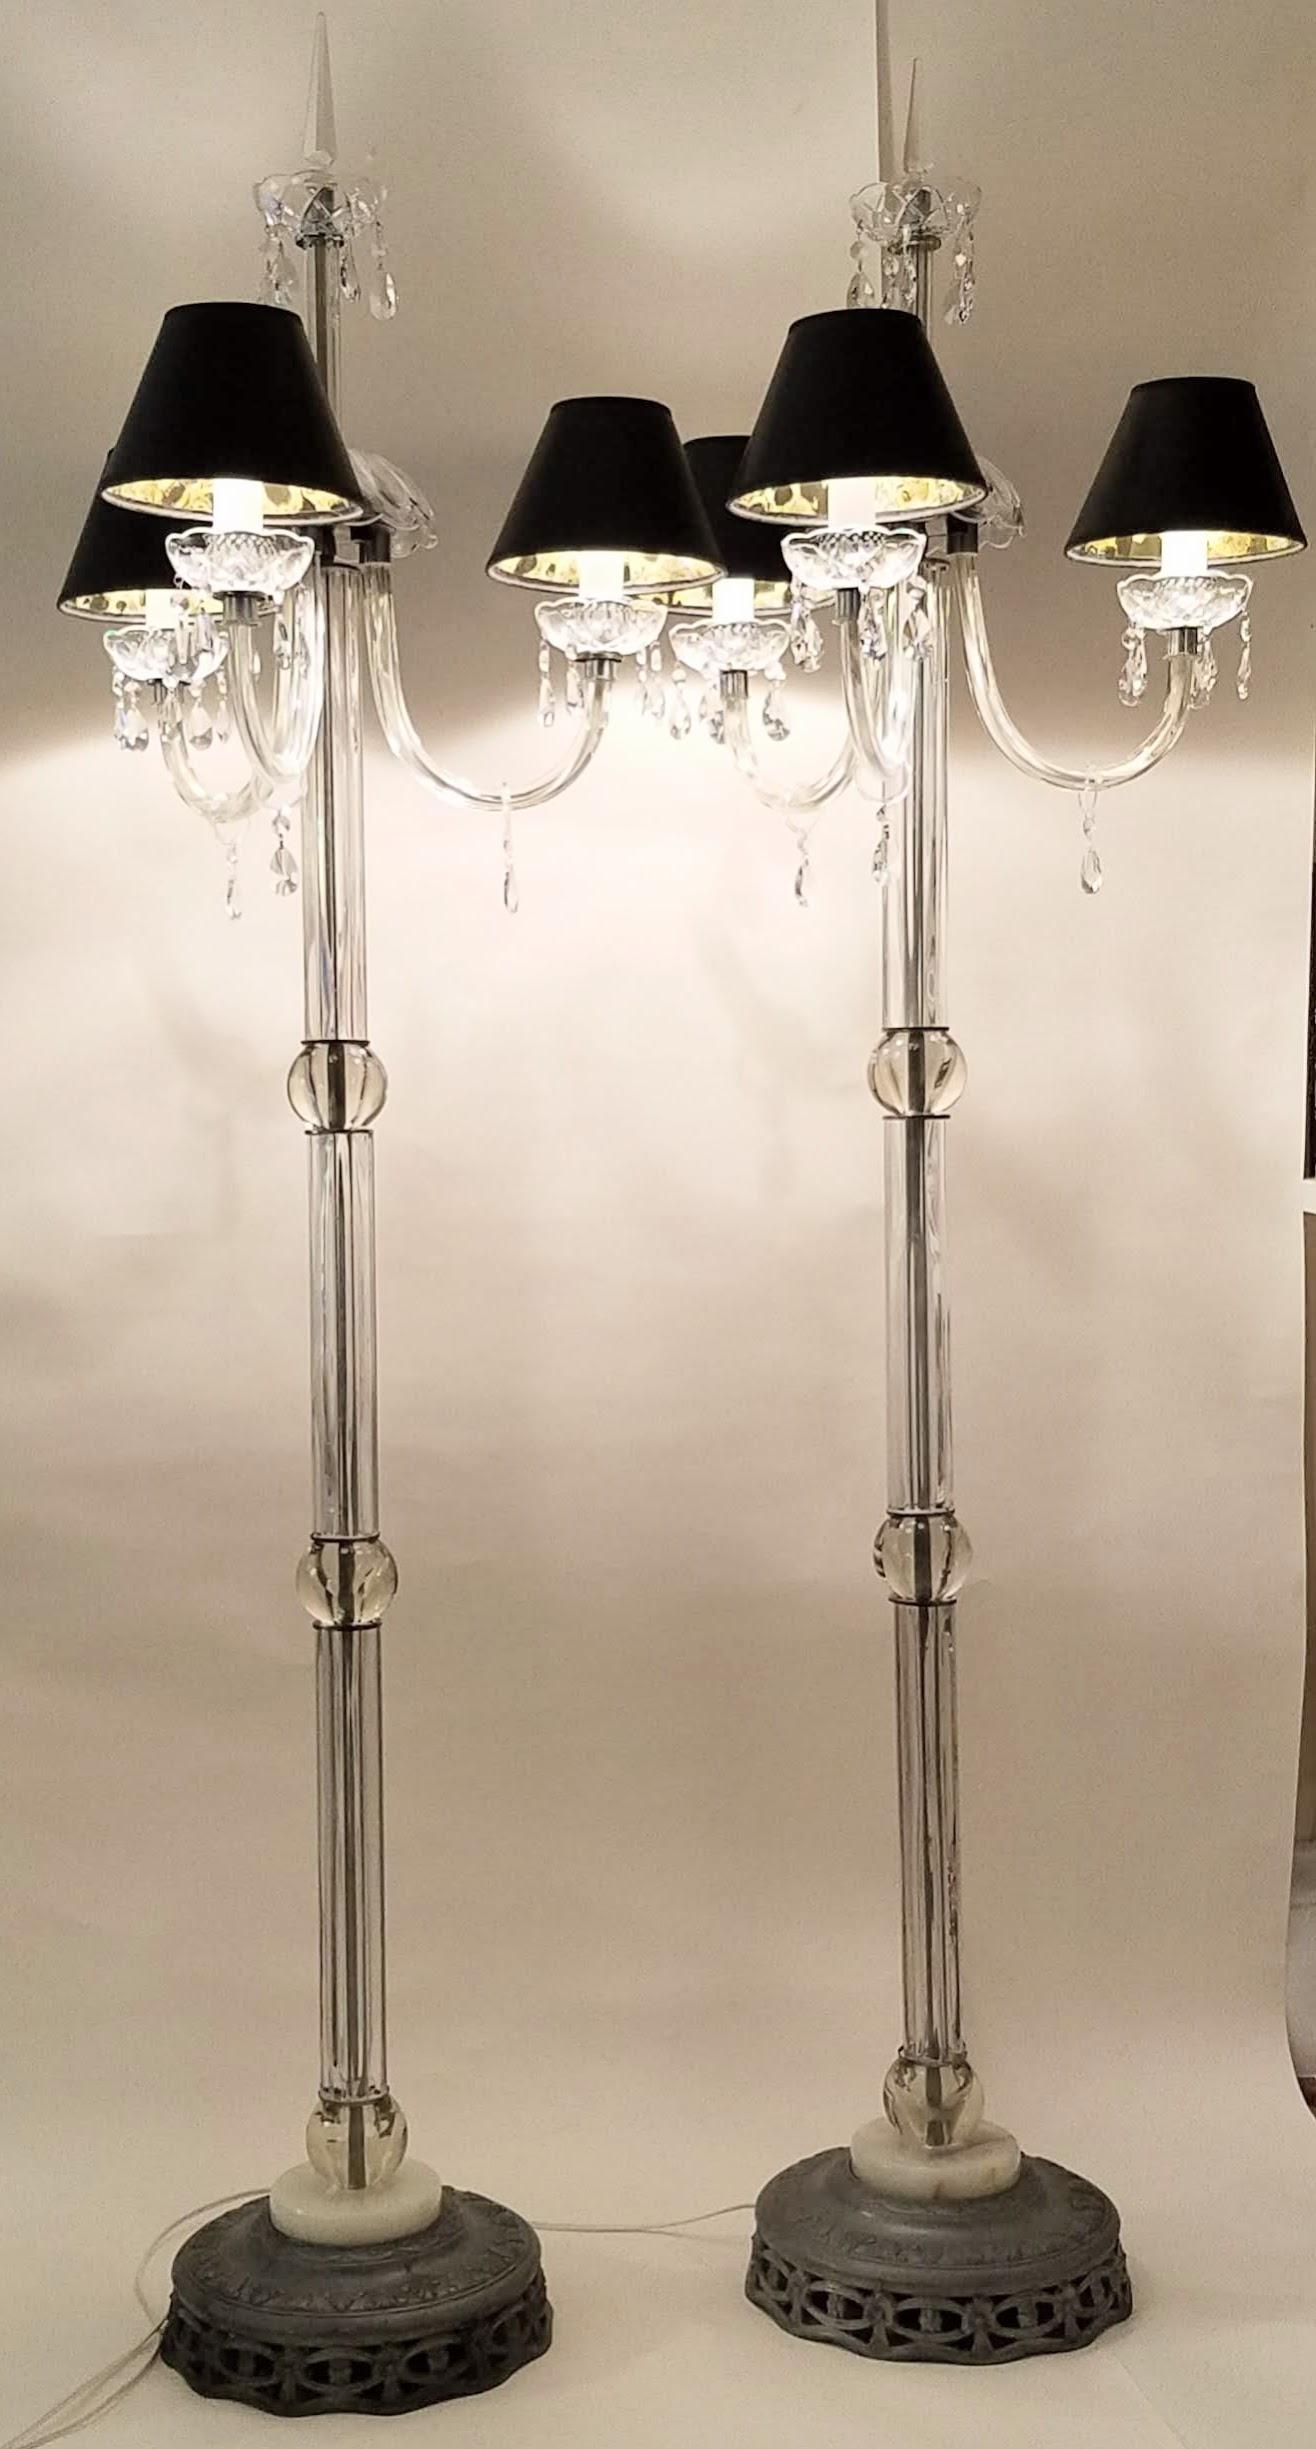 A pair of lead crystal floor lamps each with three chandelier style cast glass arms.
Each arm extends 9 inches from the fluted glass central columns and crystal ball. 
The fluted glass sections are capped with nickel plated caps and separated by